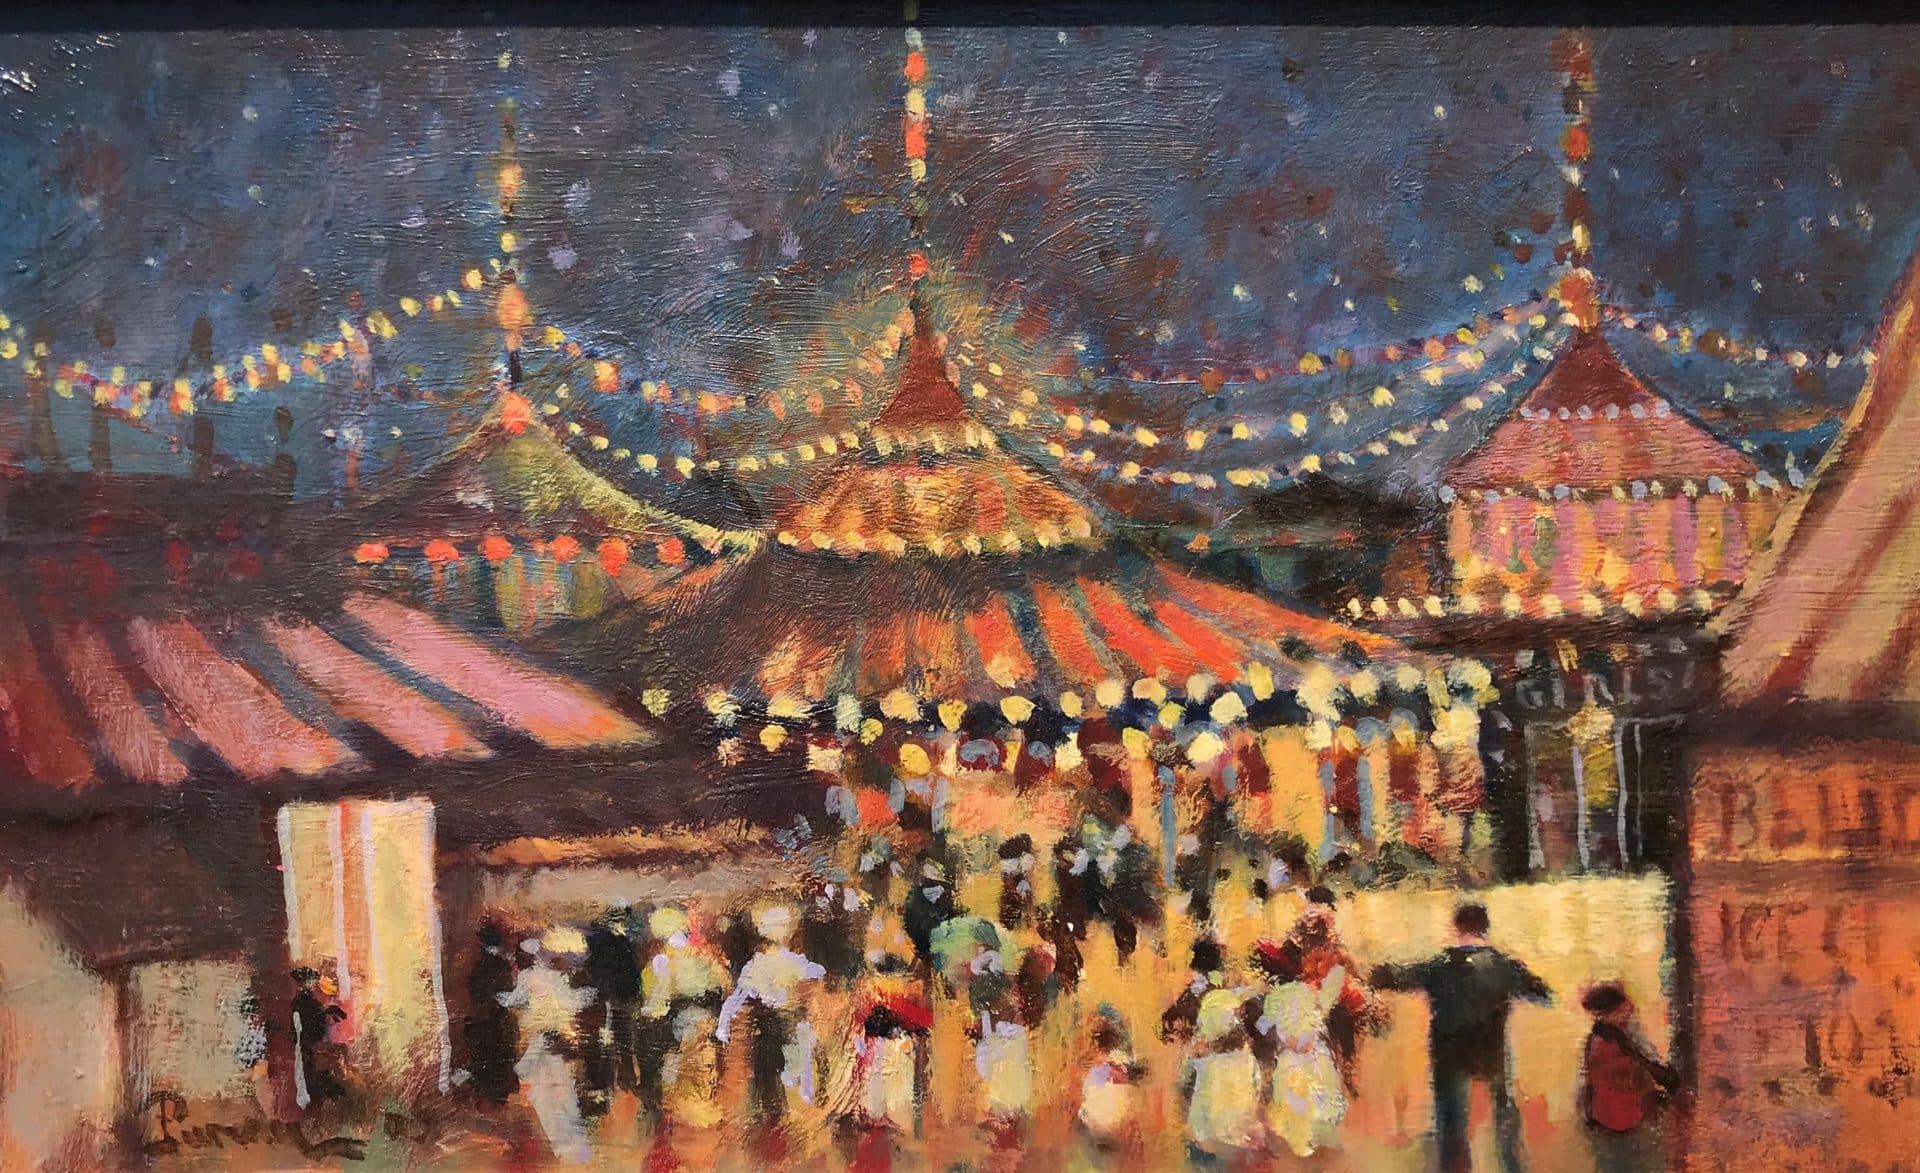 A picture of the circus lit at night painted by contemporary artist Donald Purdy